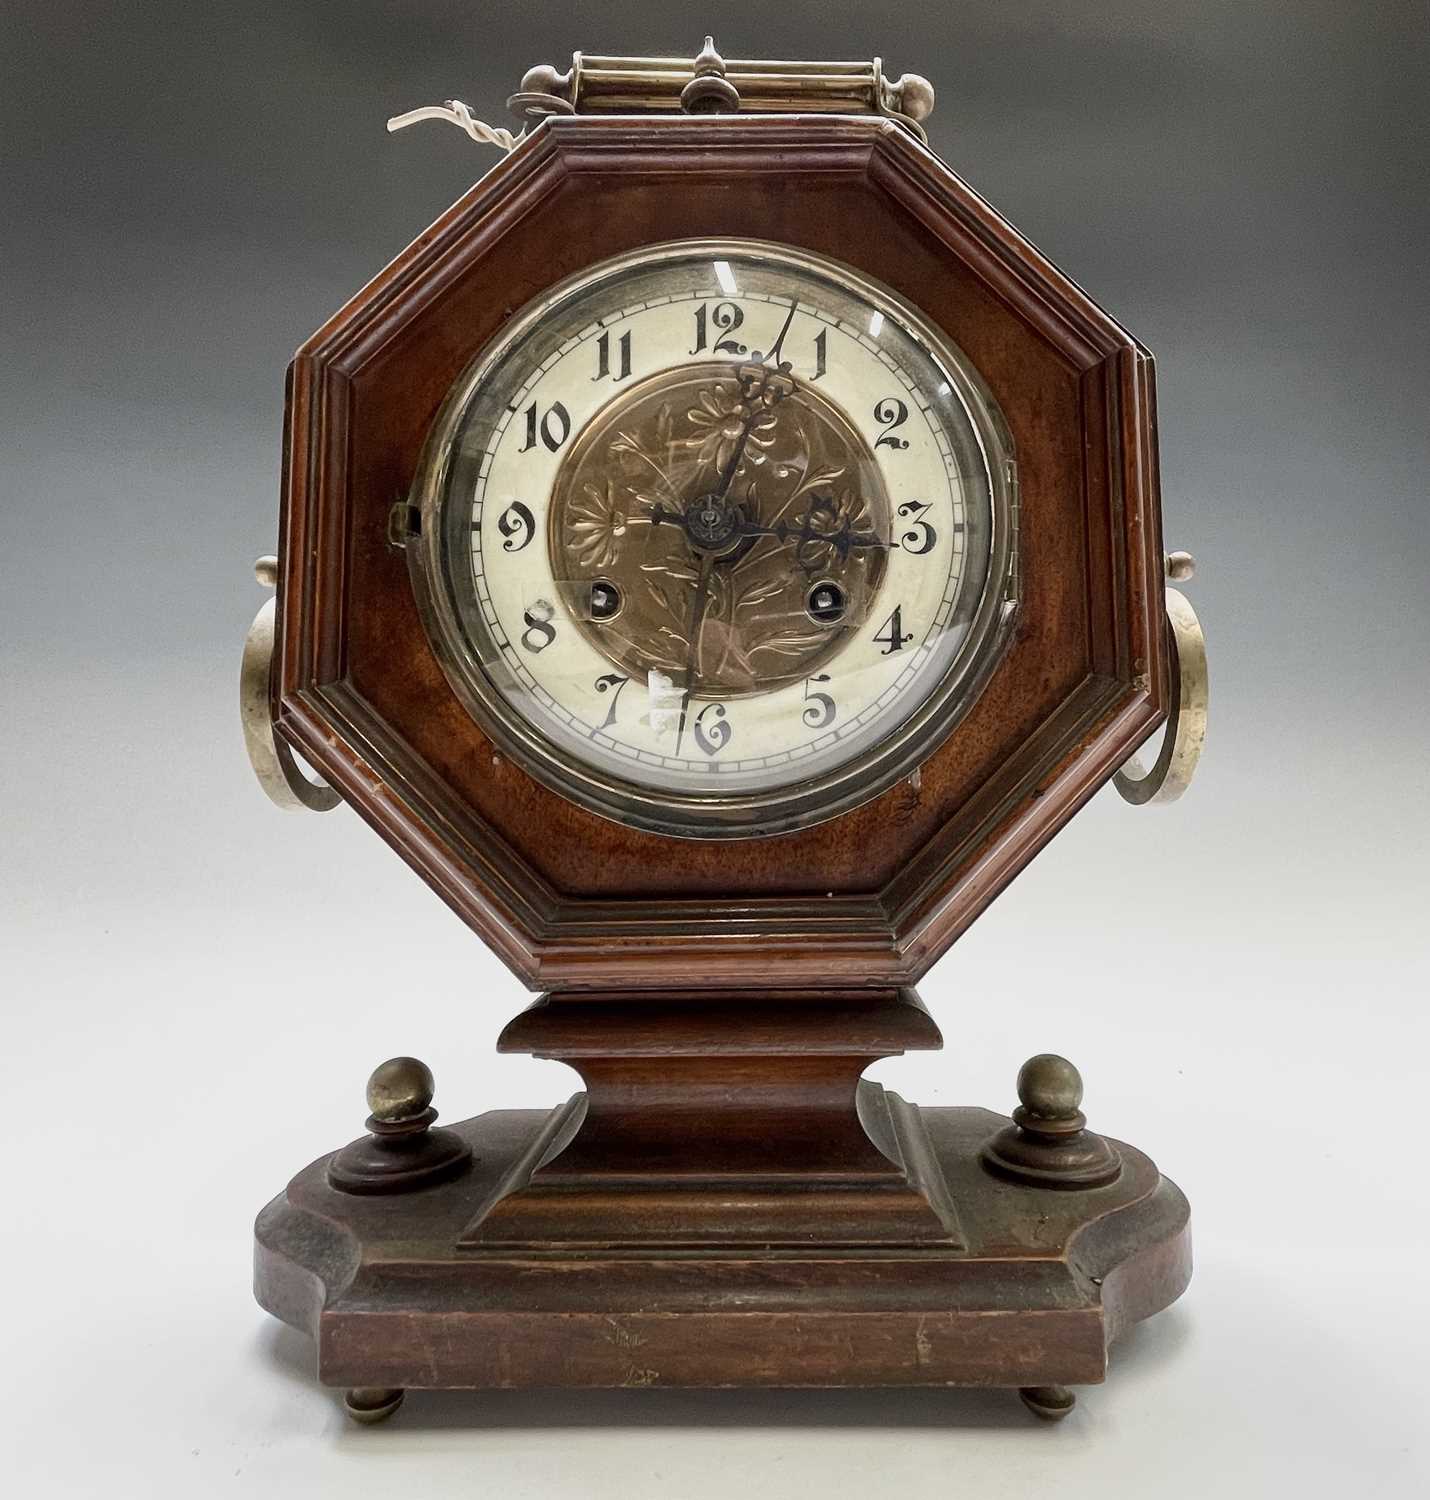 A German walnut and brass mantel clock, circa 1900, in the Aesthetic taste, with octagonal case - Image 2 of 11